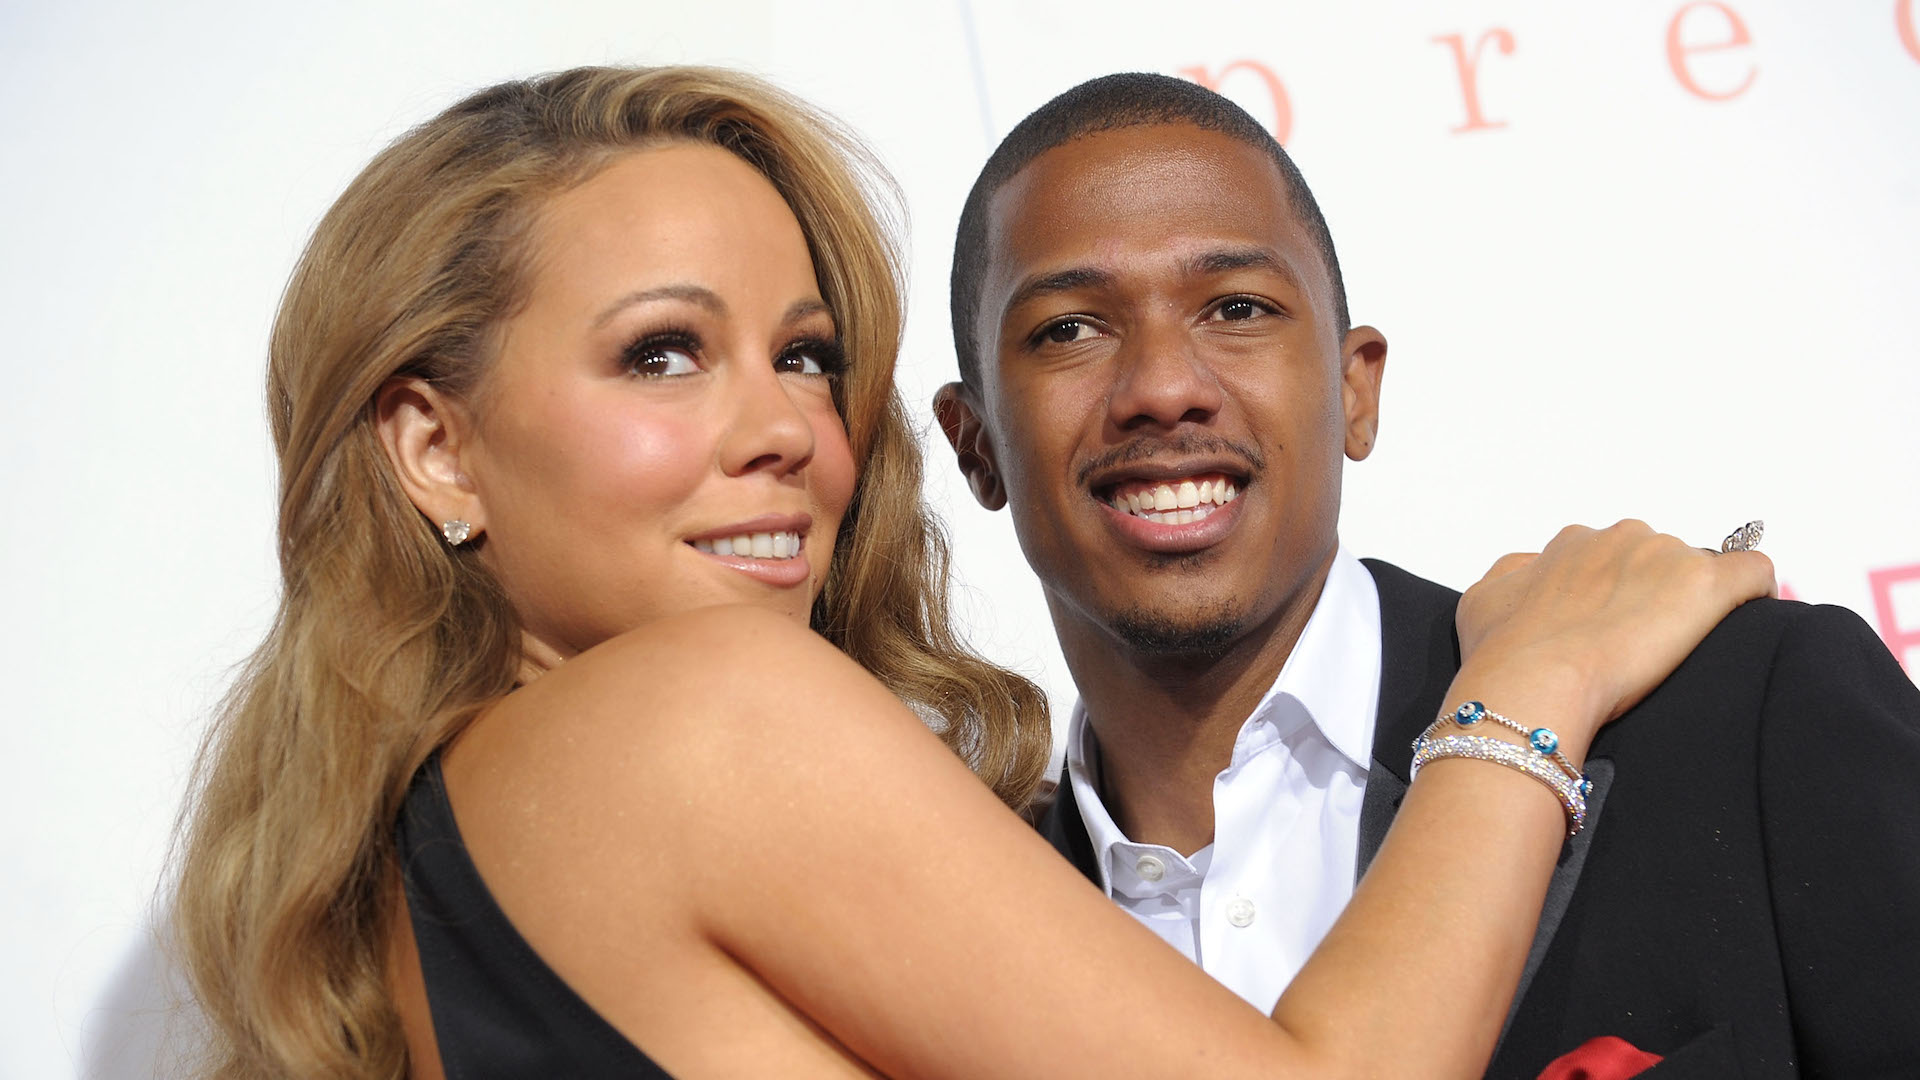 Nick Cannon Calls Mariah Carey a ‘Gift From God’ While Recalling Their Relationship